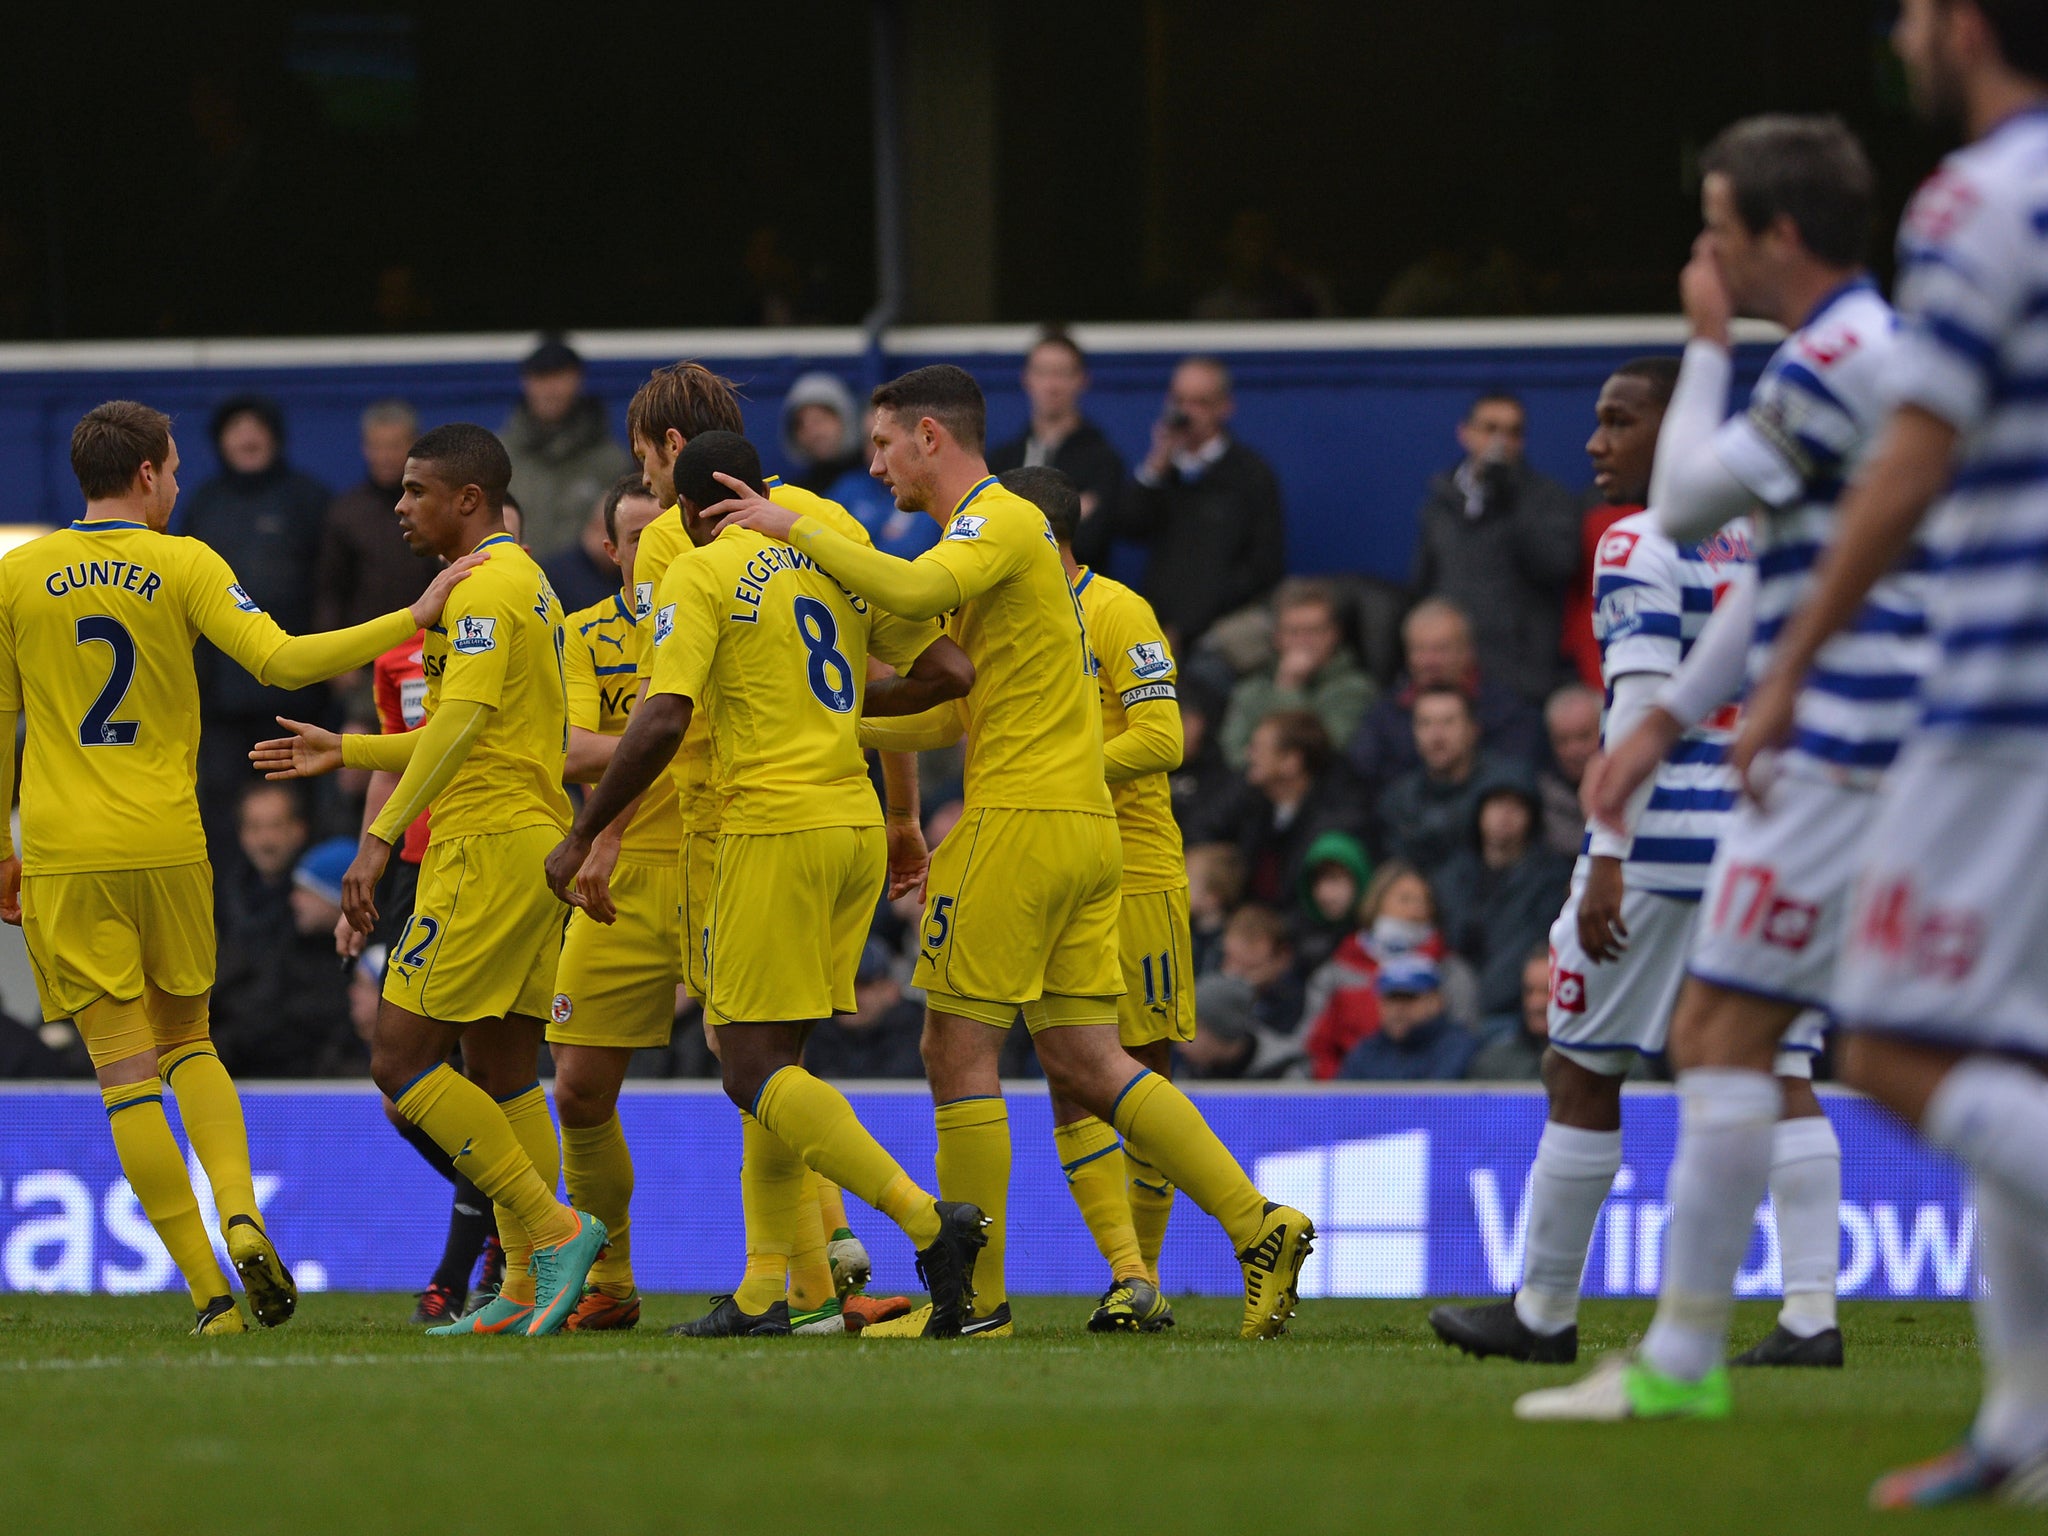 The Reading players celebrate their goal as QPR look on